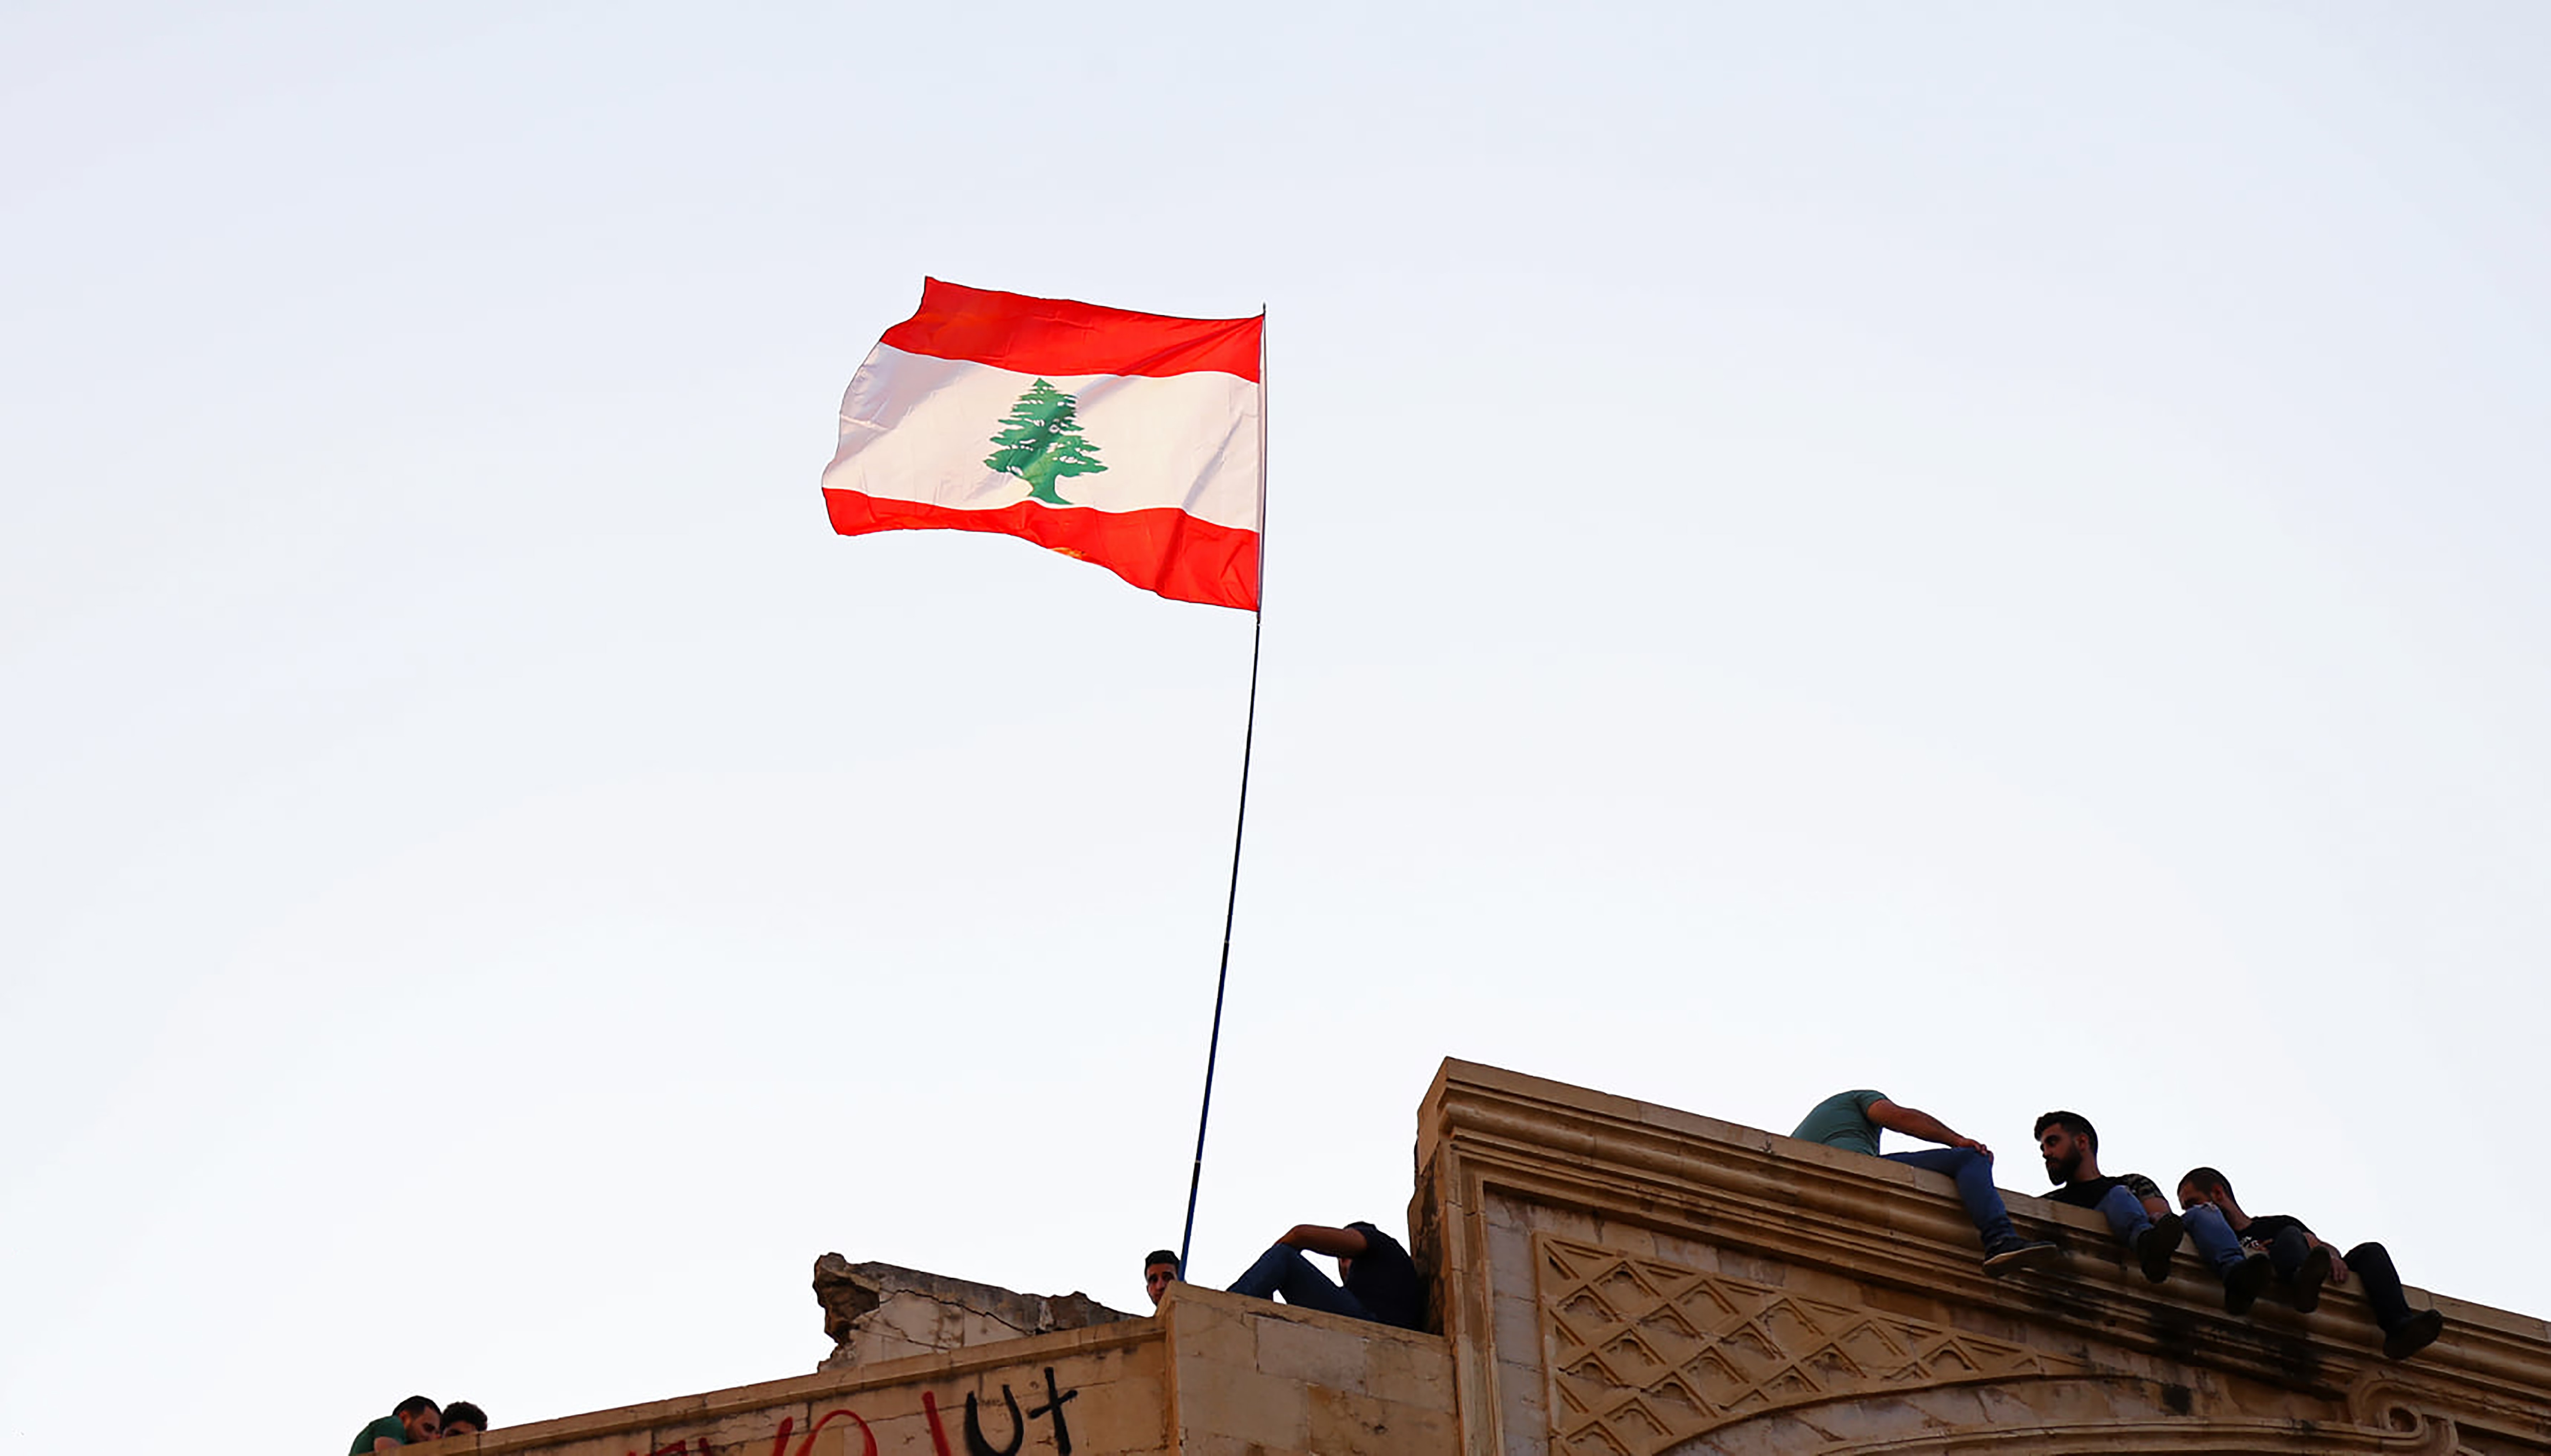 The Different Citizenships in Crisis-Ridden Lebanon